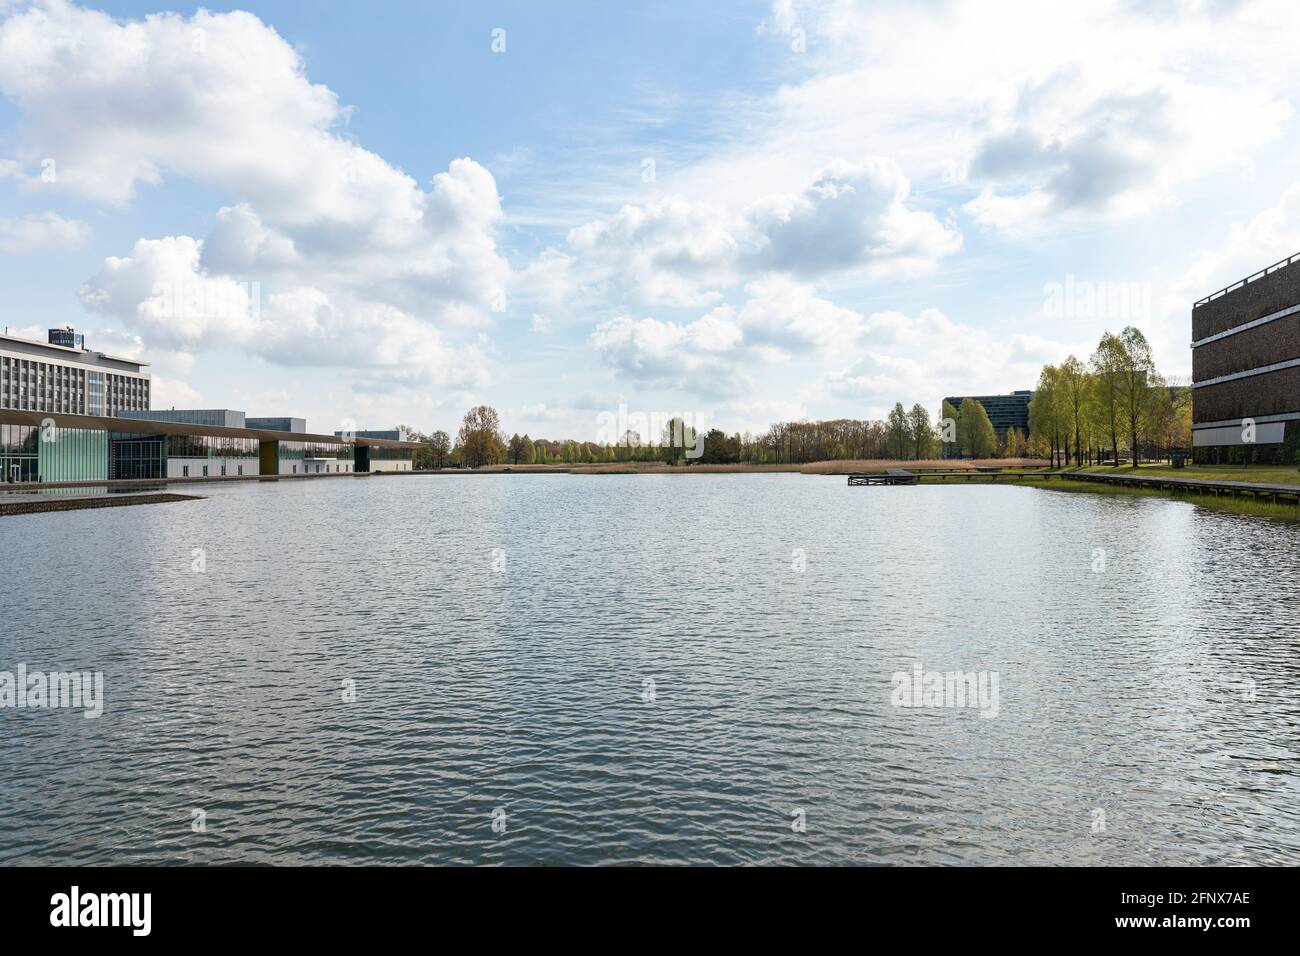 Eindhoven, The Netherlands, May 3rd 2021. High Tech Campus exterior buildings with the Philips headquarters, a lake, trees and greenery on a sunny day Stock Photo